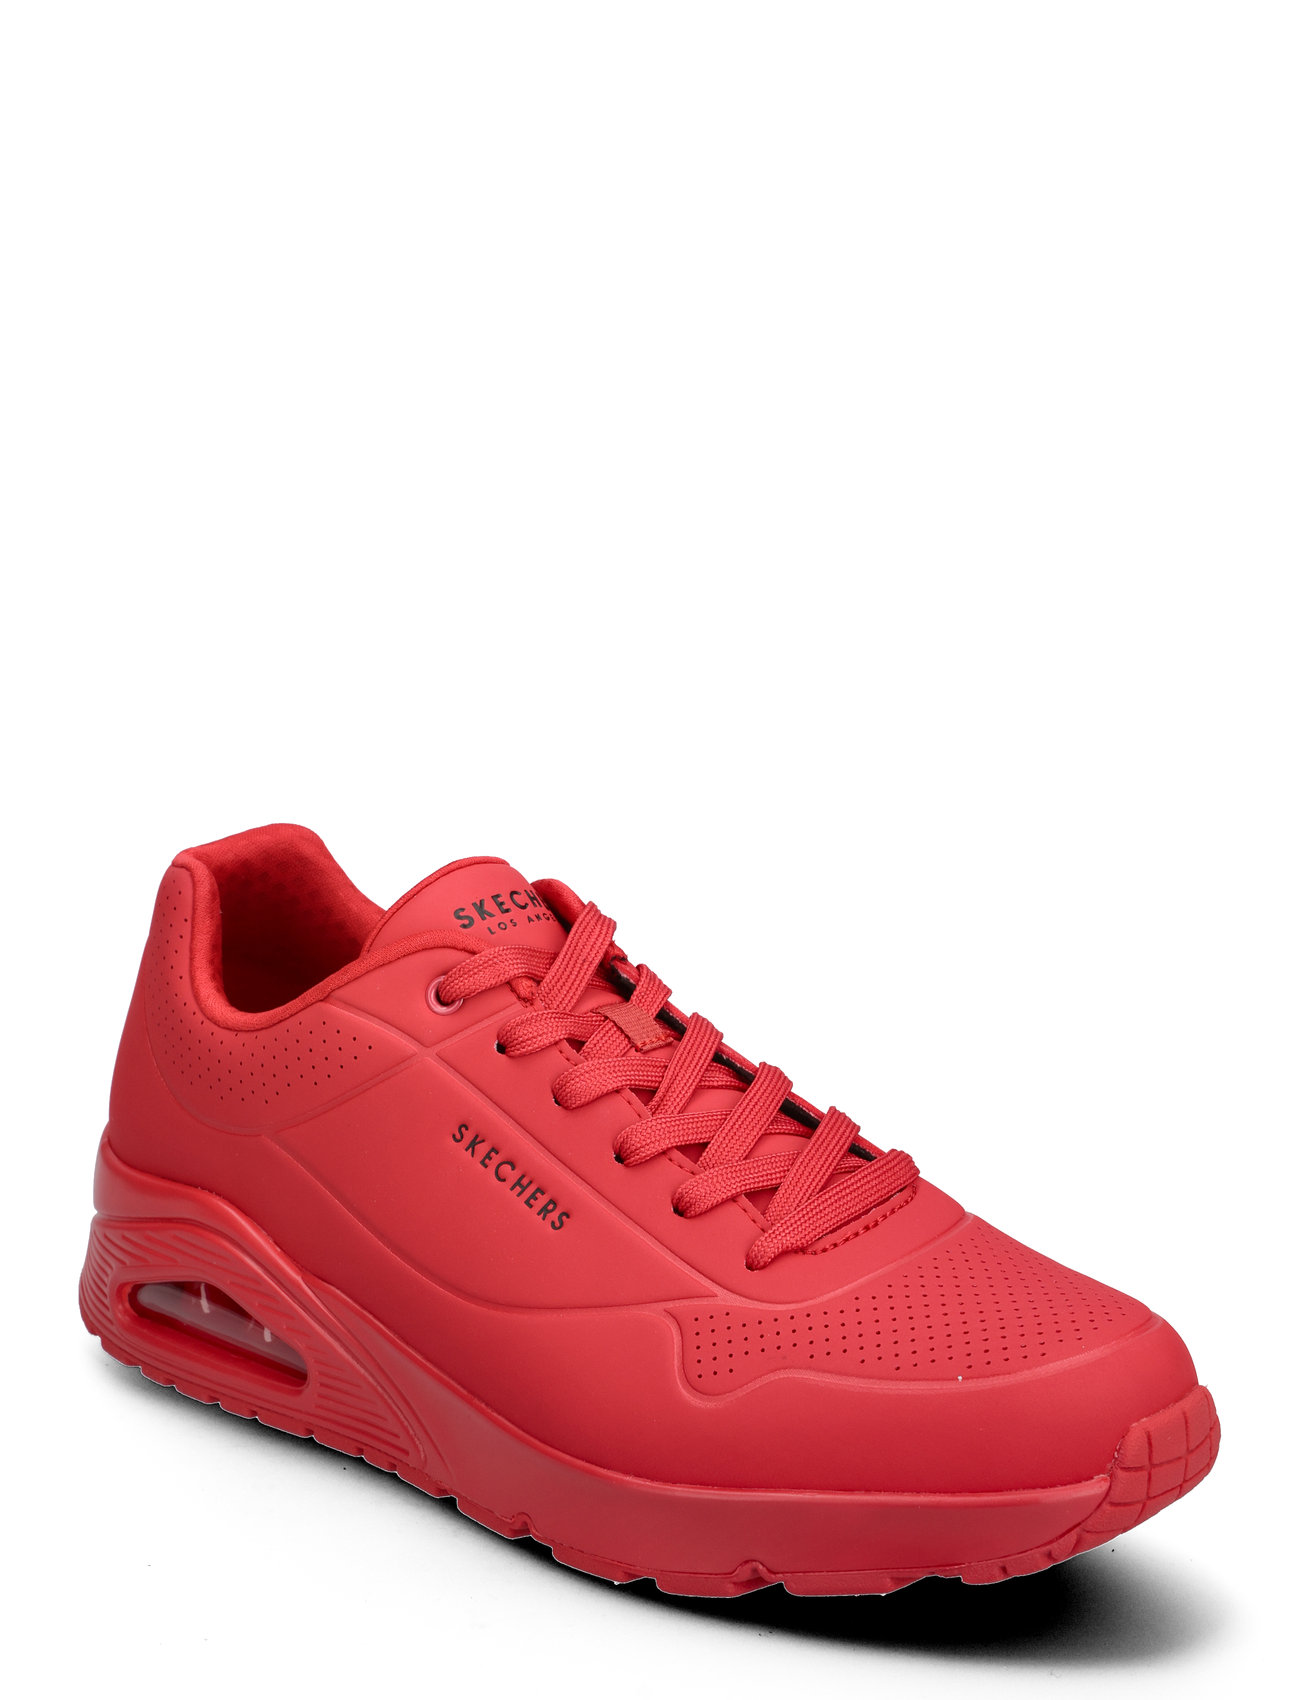 Mens Uno - Stand On Air Low-top Sneakers Red Skechers